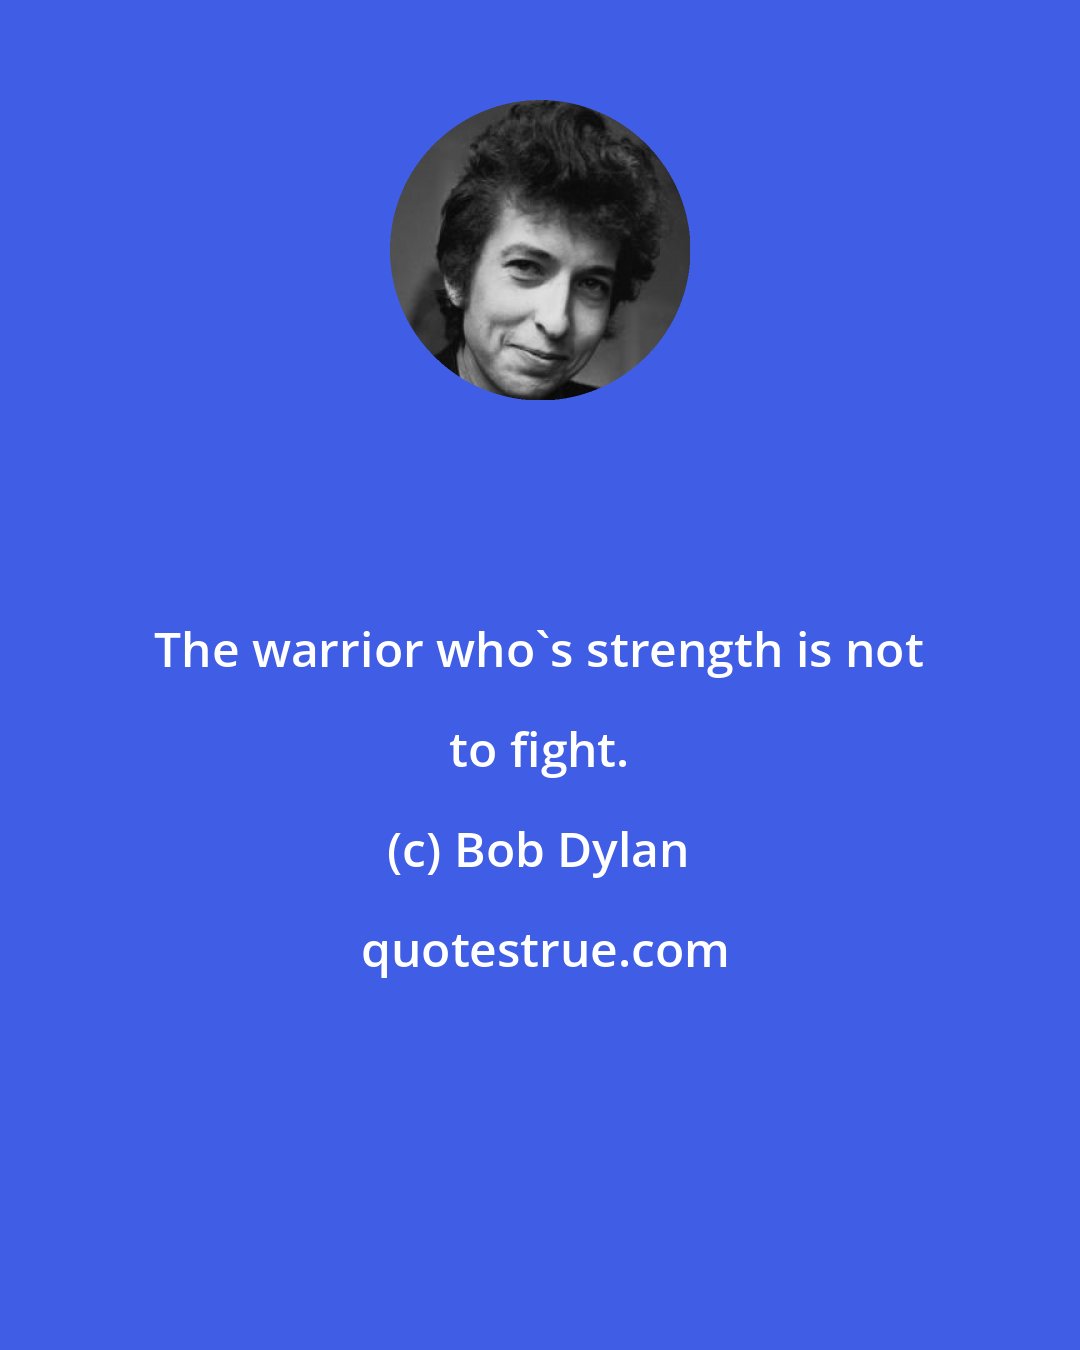 Bob Dylan: The warrior who's strength is not to fight.